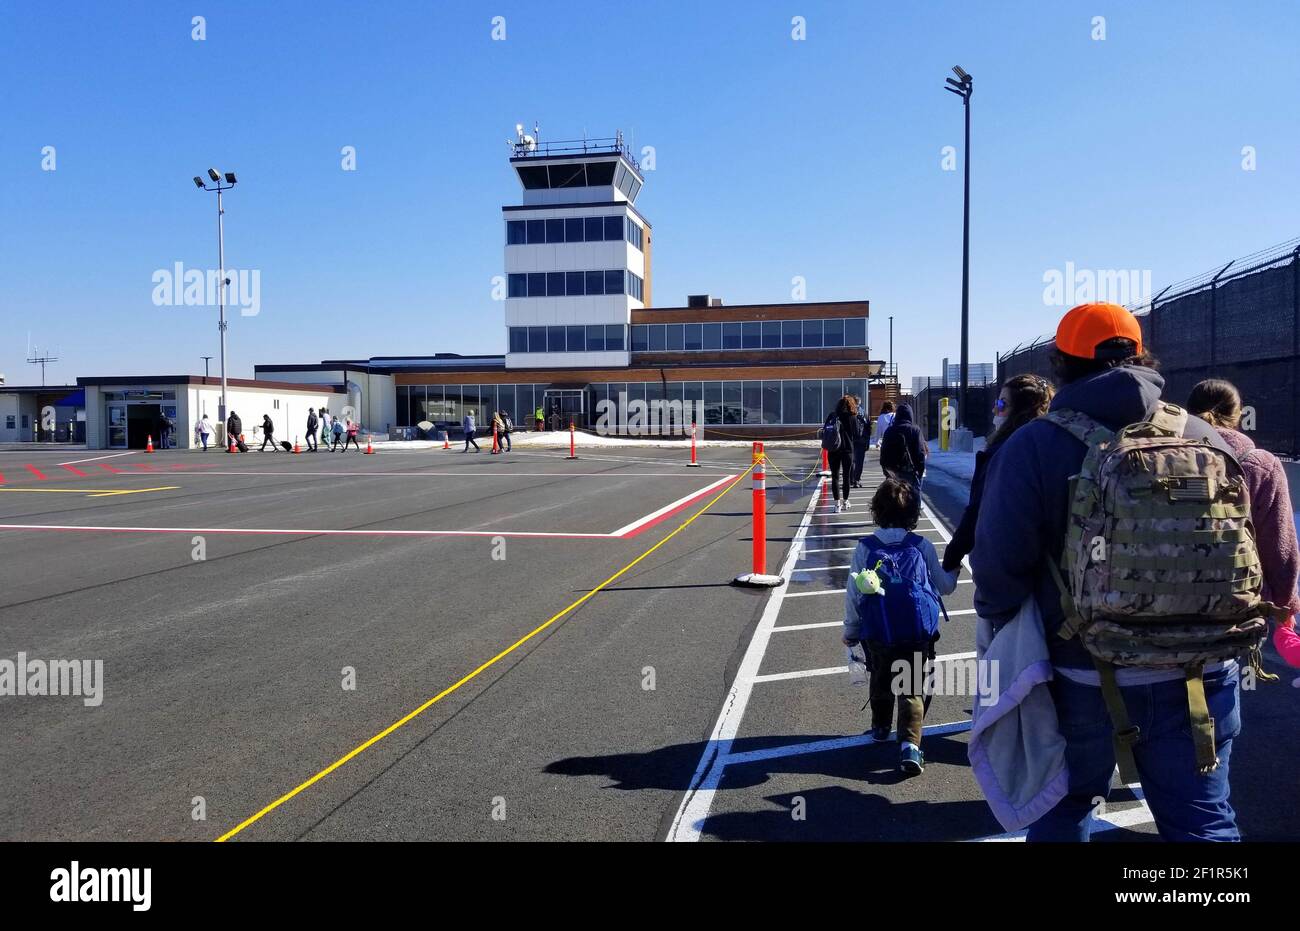 New Castle, Delaware, U.S.A - February 14, 2021 - Passengers walking on the tarmac during a cold winter Stock Photo